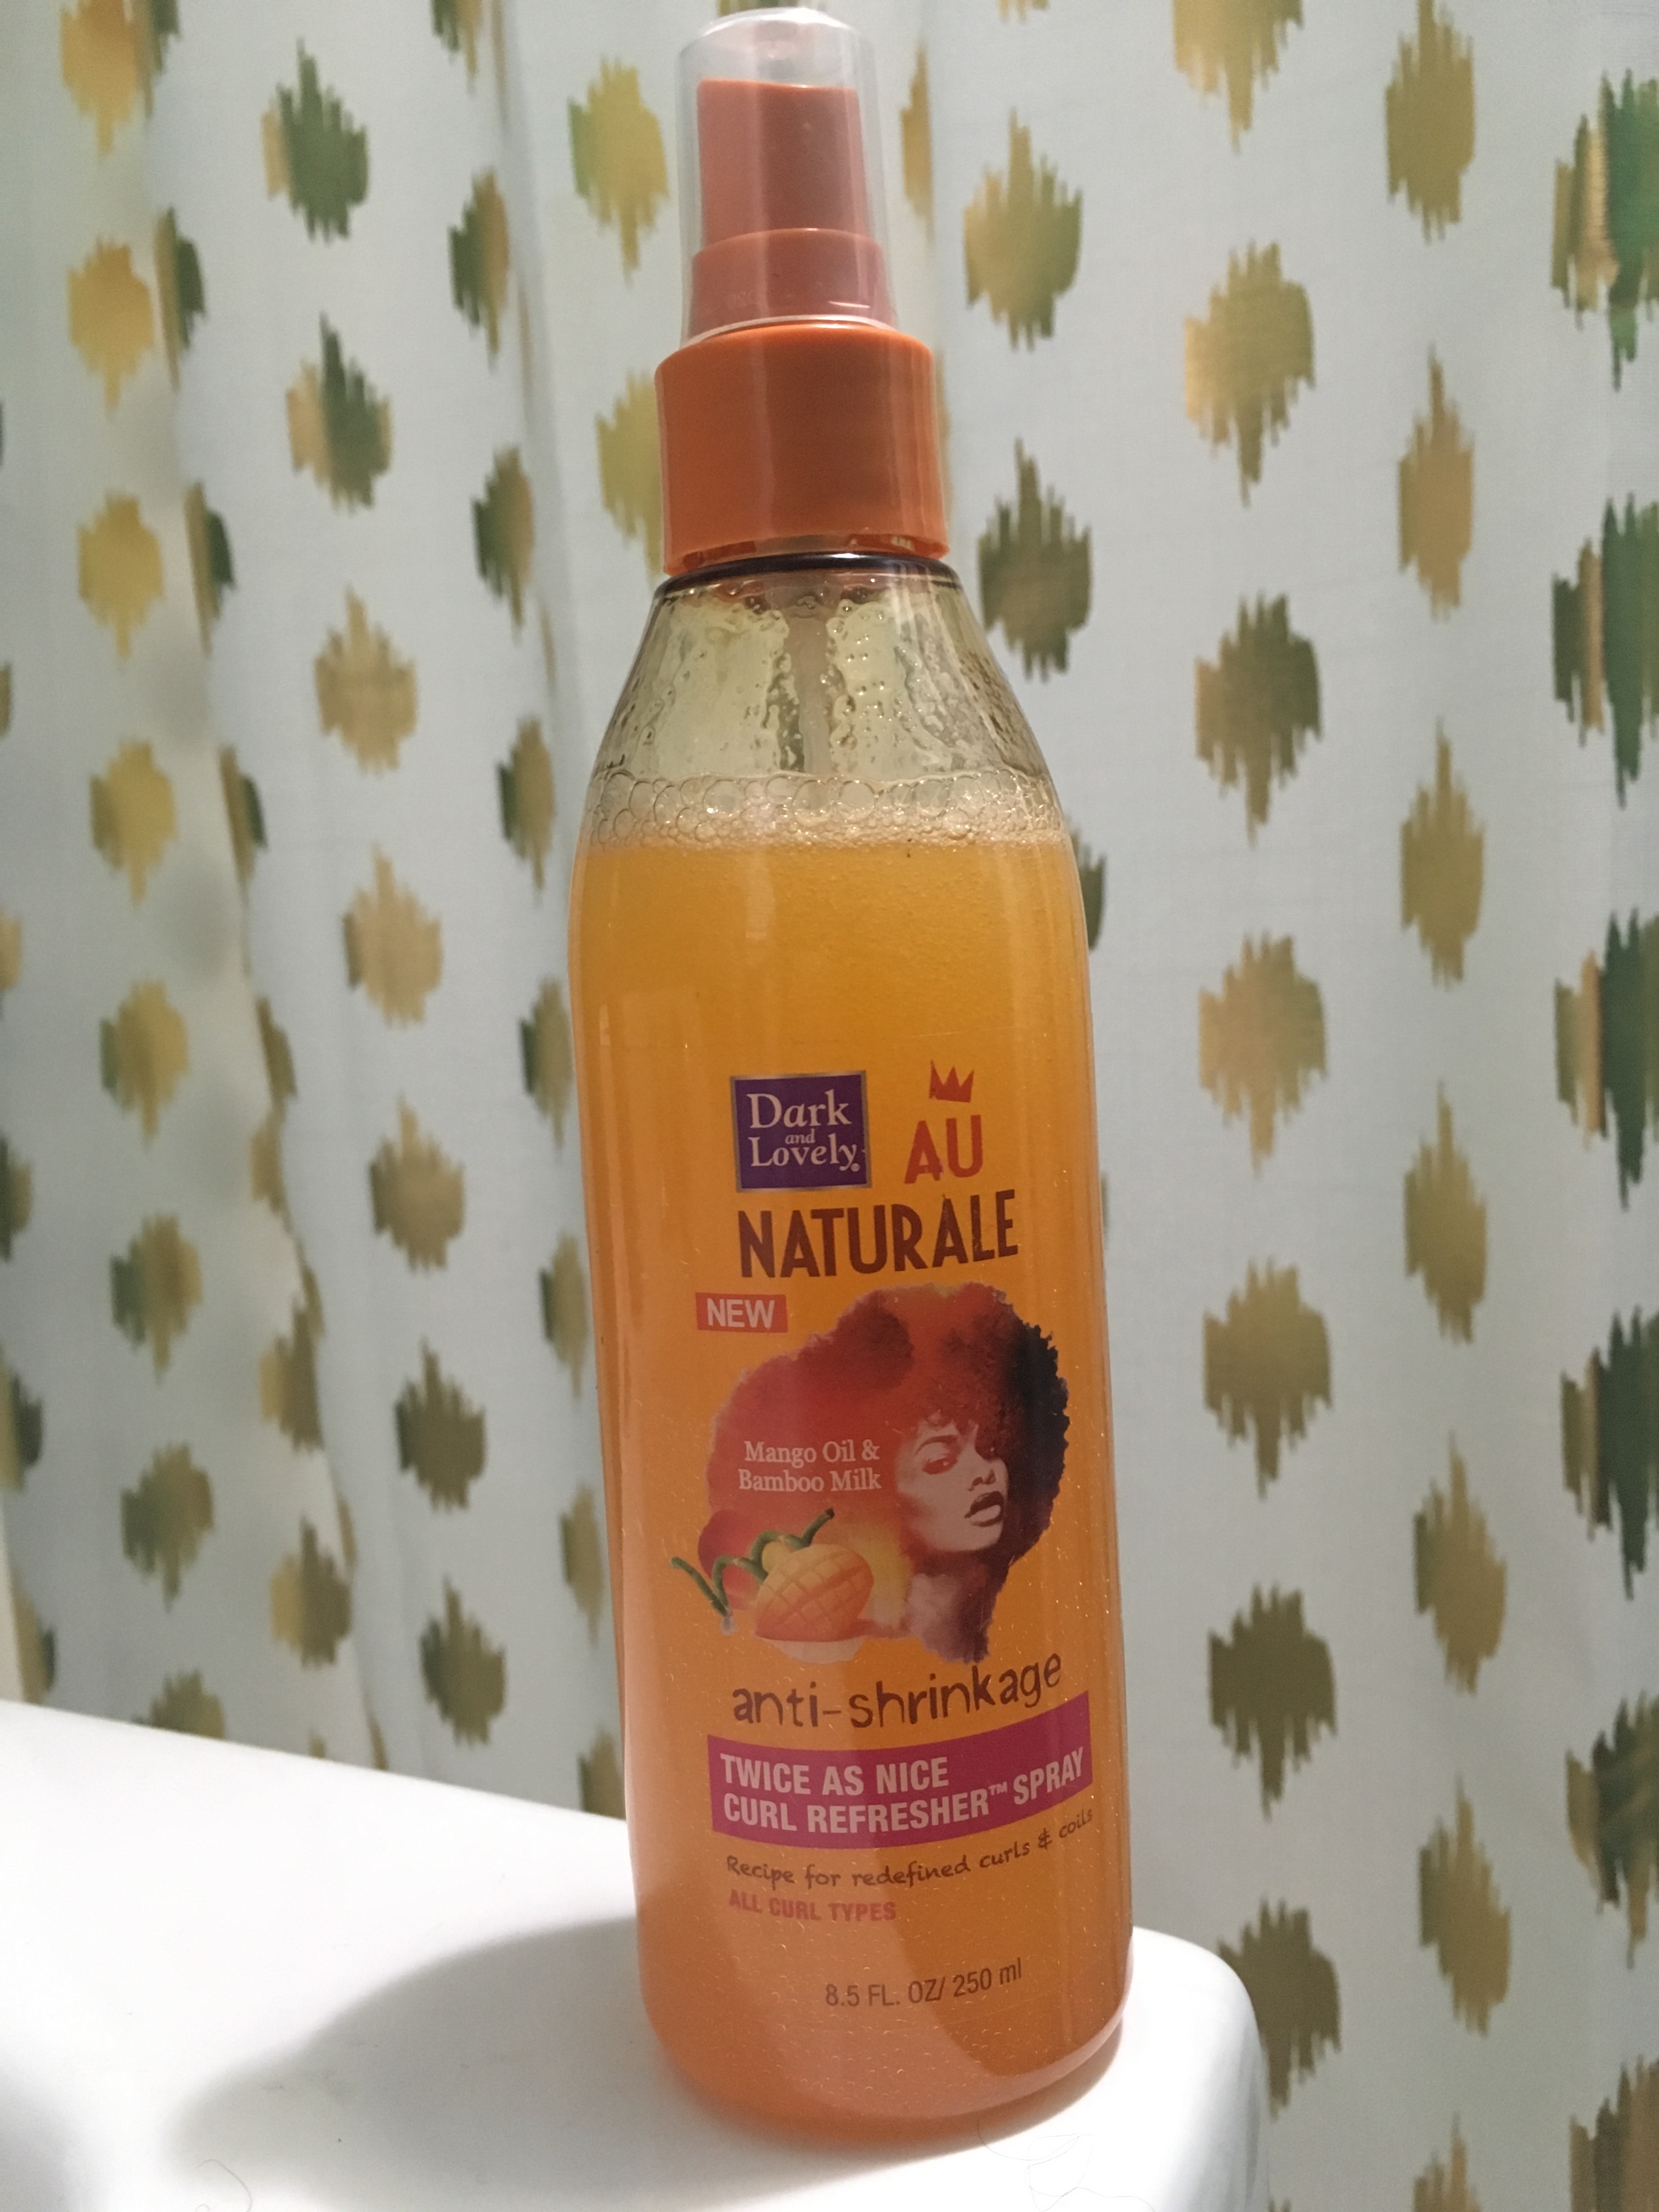 Dark And Lovely Au Naturale Anti-Shrinkage Curl Refresher Spray